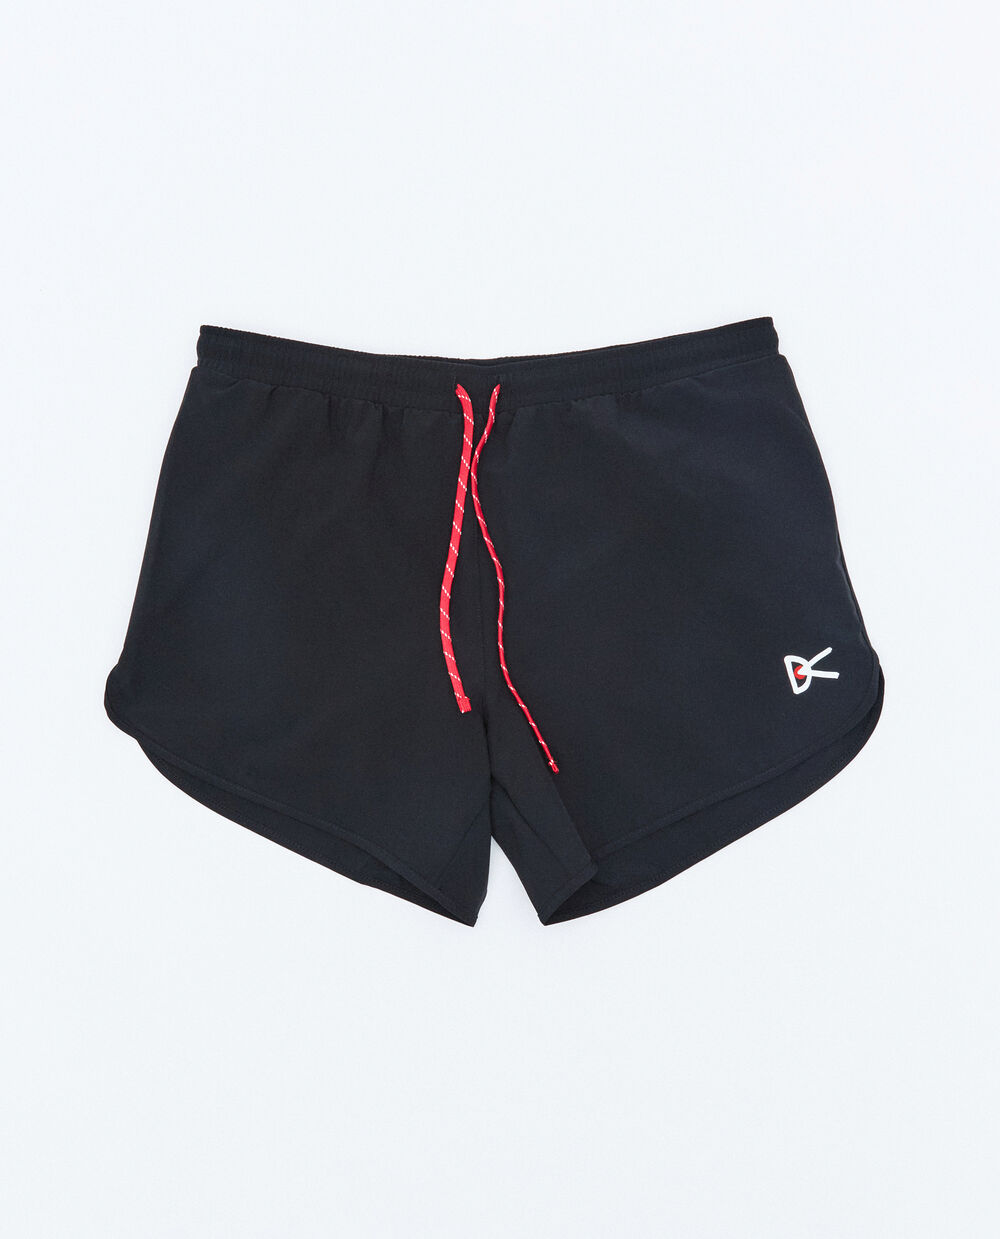 DISTRICT VISION 5IN TRAINING SHORTS